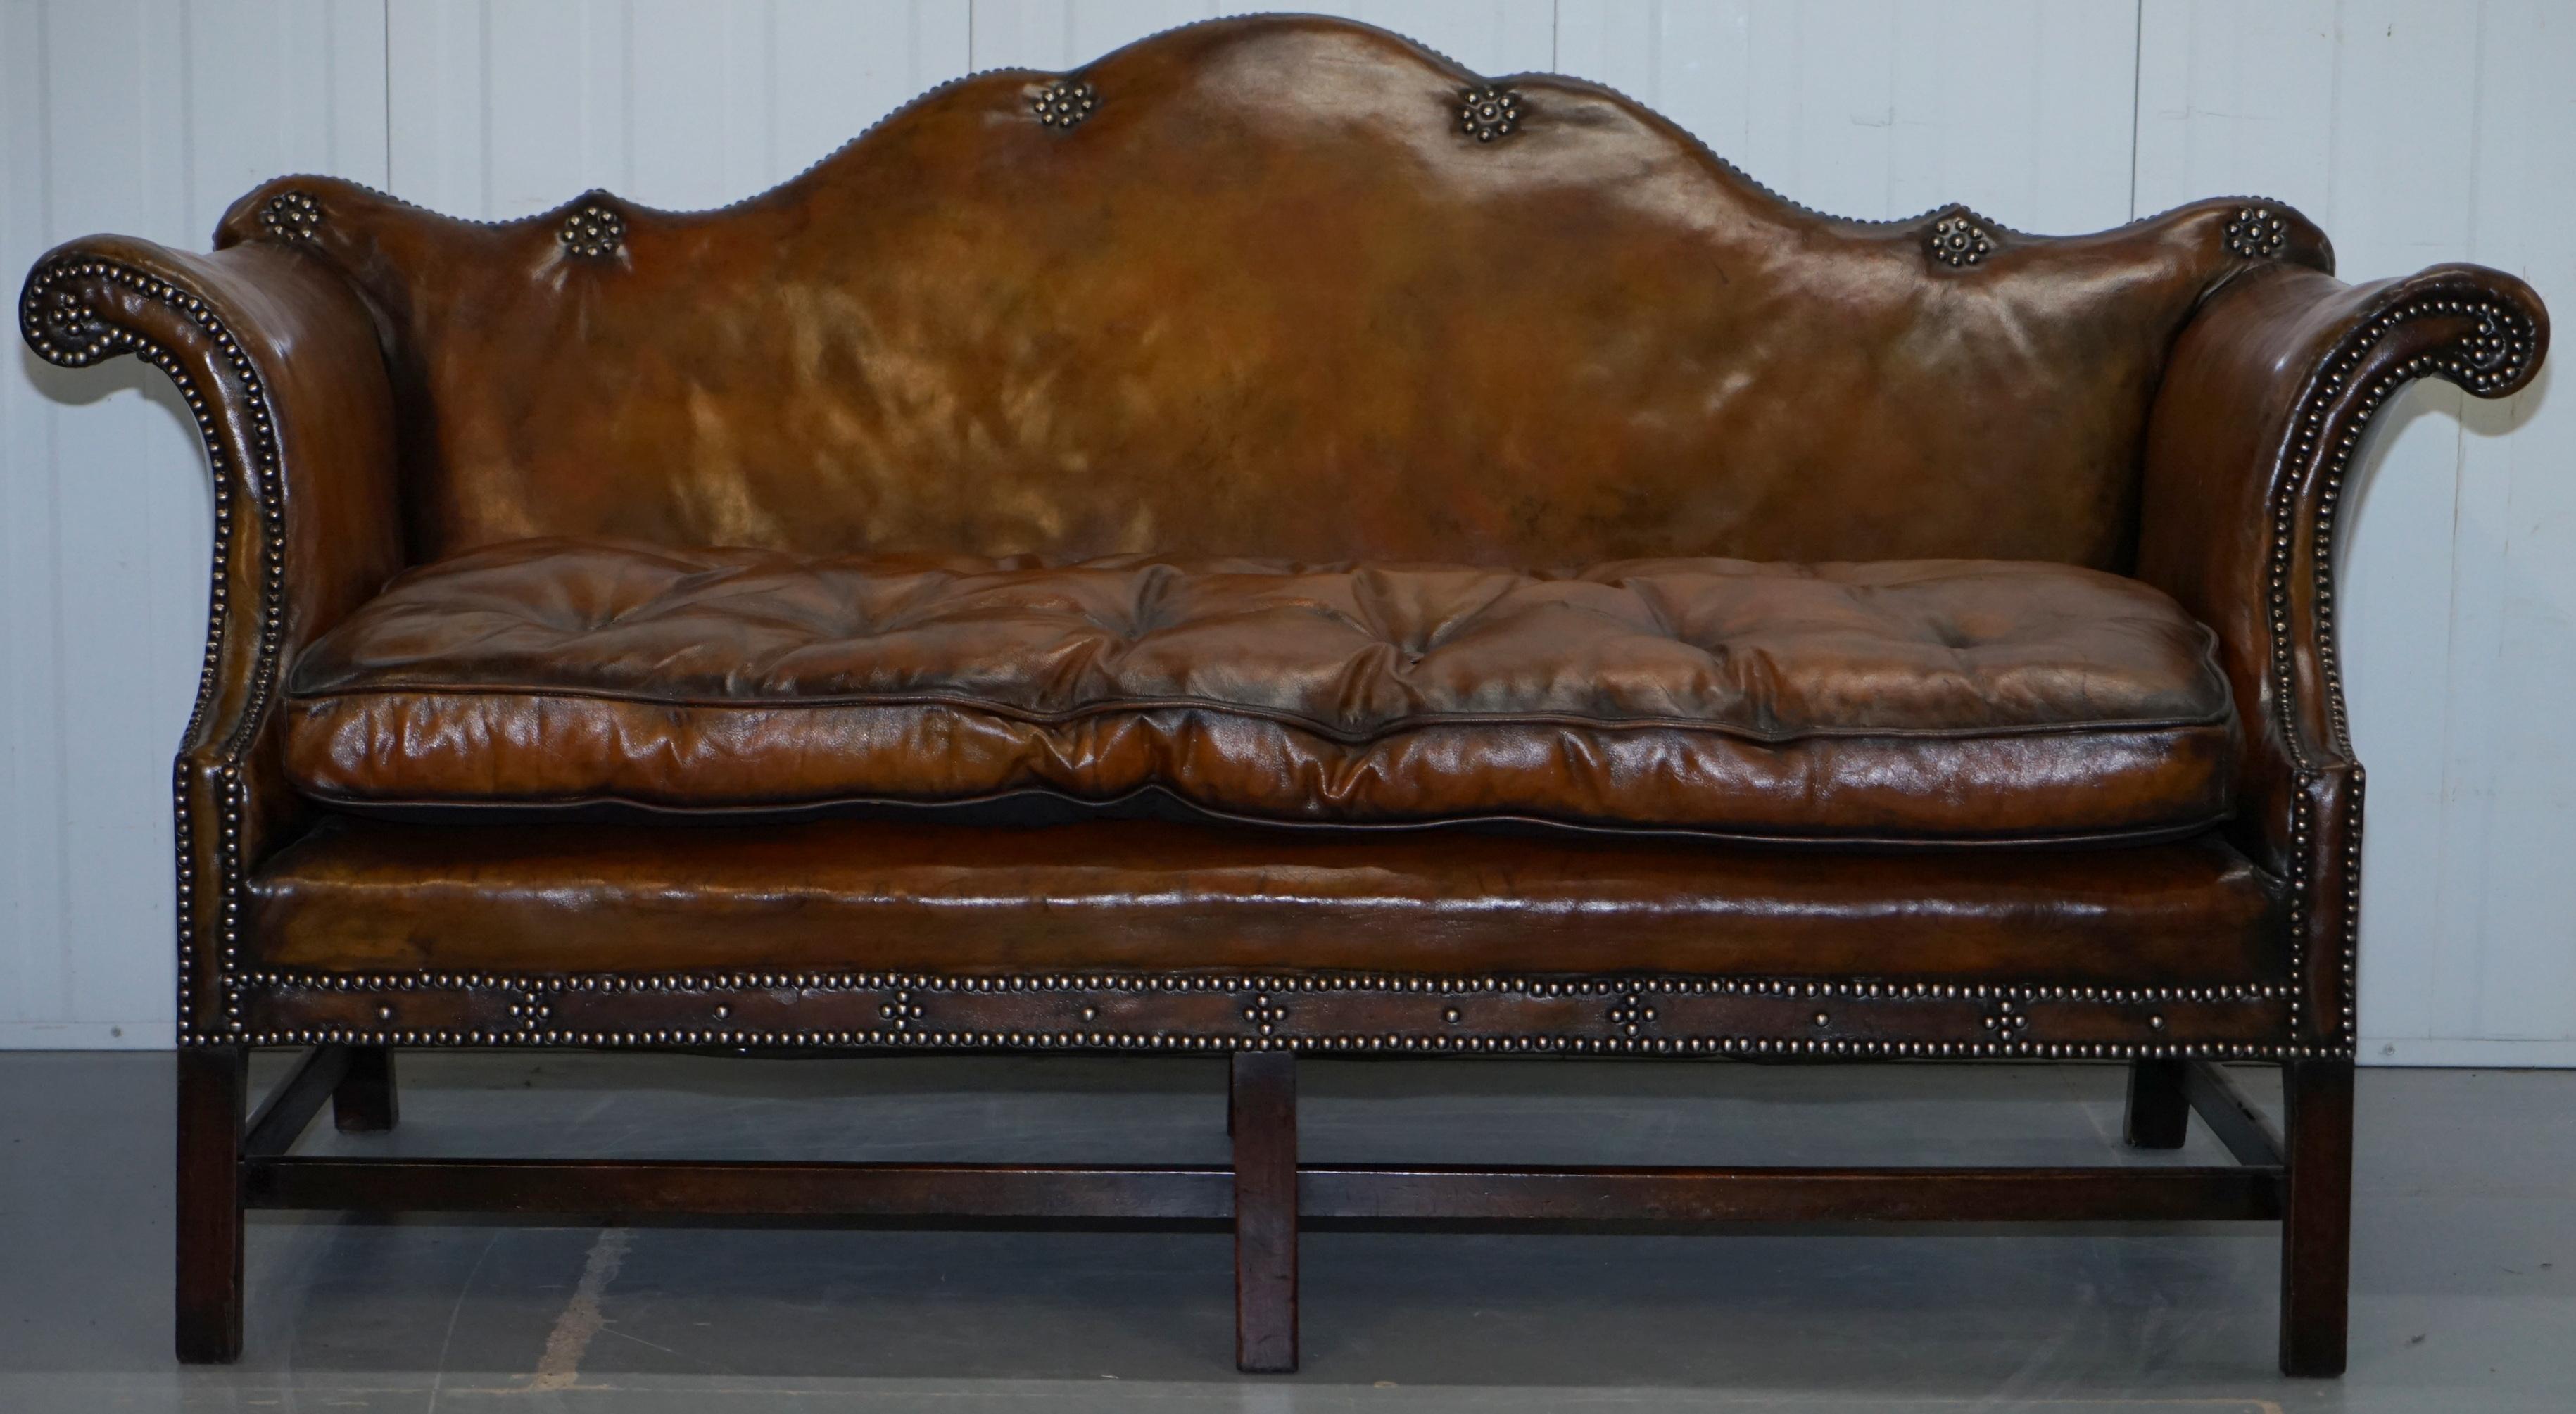 We are delighted to offer for sale this lovely period early Victorian Fully restored aged whiskey brown leather Camelback sofa 

Please note the delivery fee listed is just a guide, it covers within the M25 only

A fantastic looking and